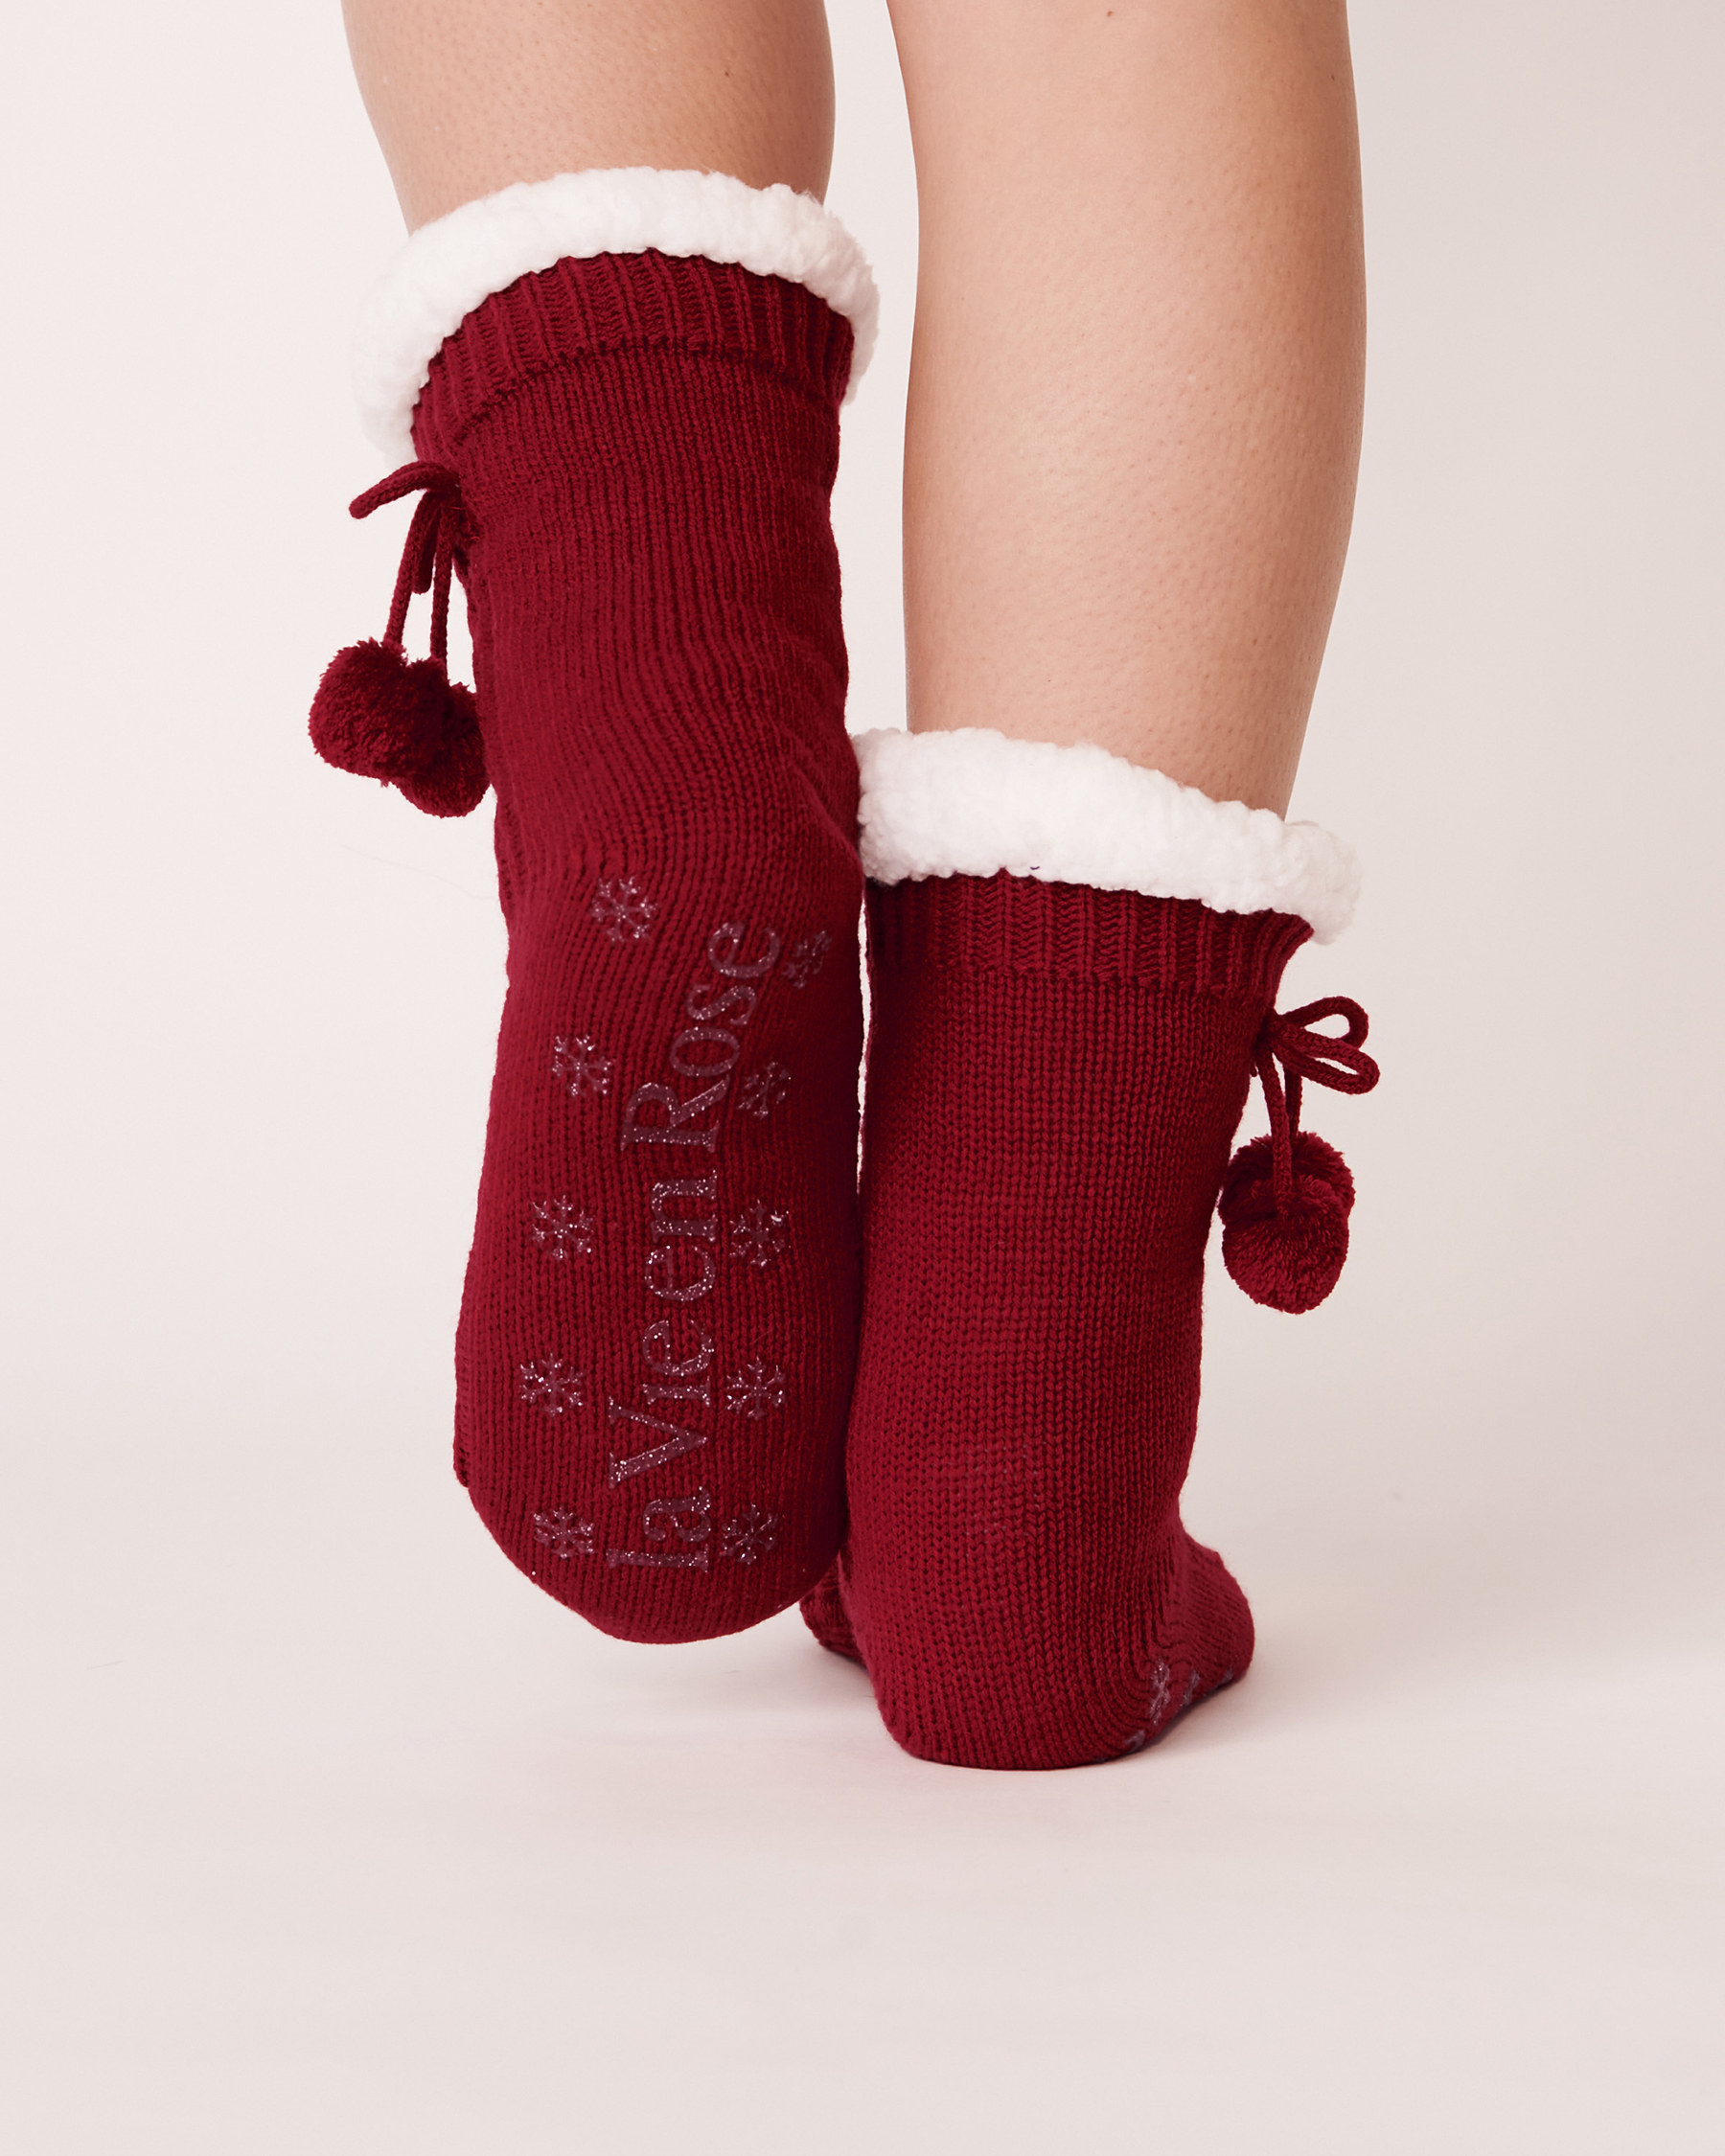 LA VIE EN ROSE Knit and Sherpa Socks Candy red 40700111 - View2